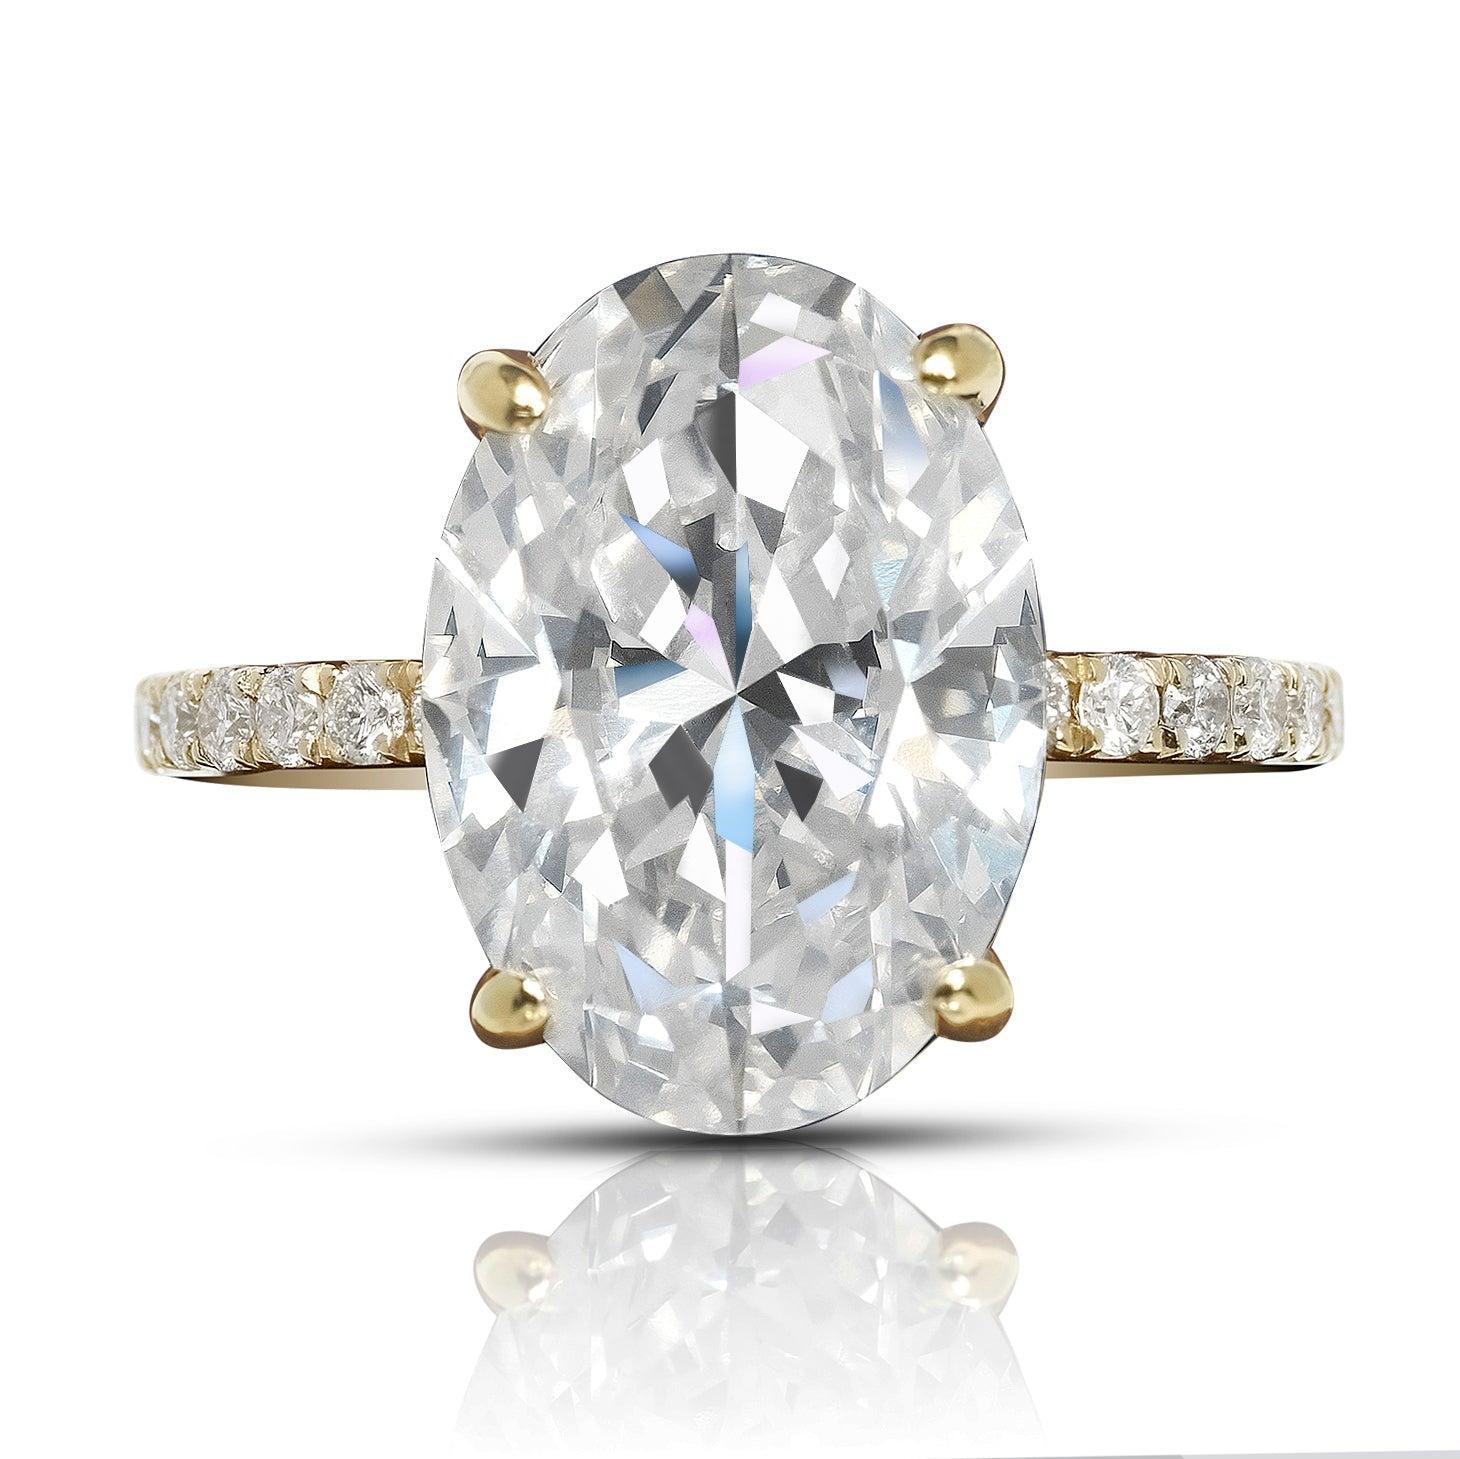 LEAH Oval-Cut Thin Band Diamond Ring BY MIKE NEKTA

GIA CERTIFIED
Center Diamond:
Carat Weight: 5 Carat
Color: F*
Clarity: VS2
Style: OVAL
Approximate Measurement: 13.6 x 9.6 x 5.7 mm
* This diamond has been treated by one or more processes to